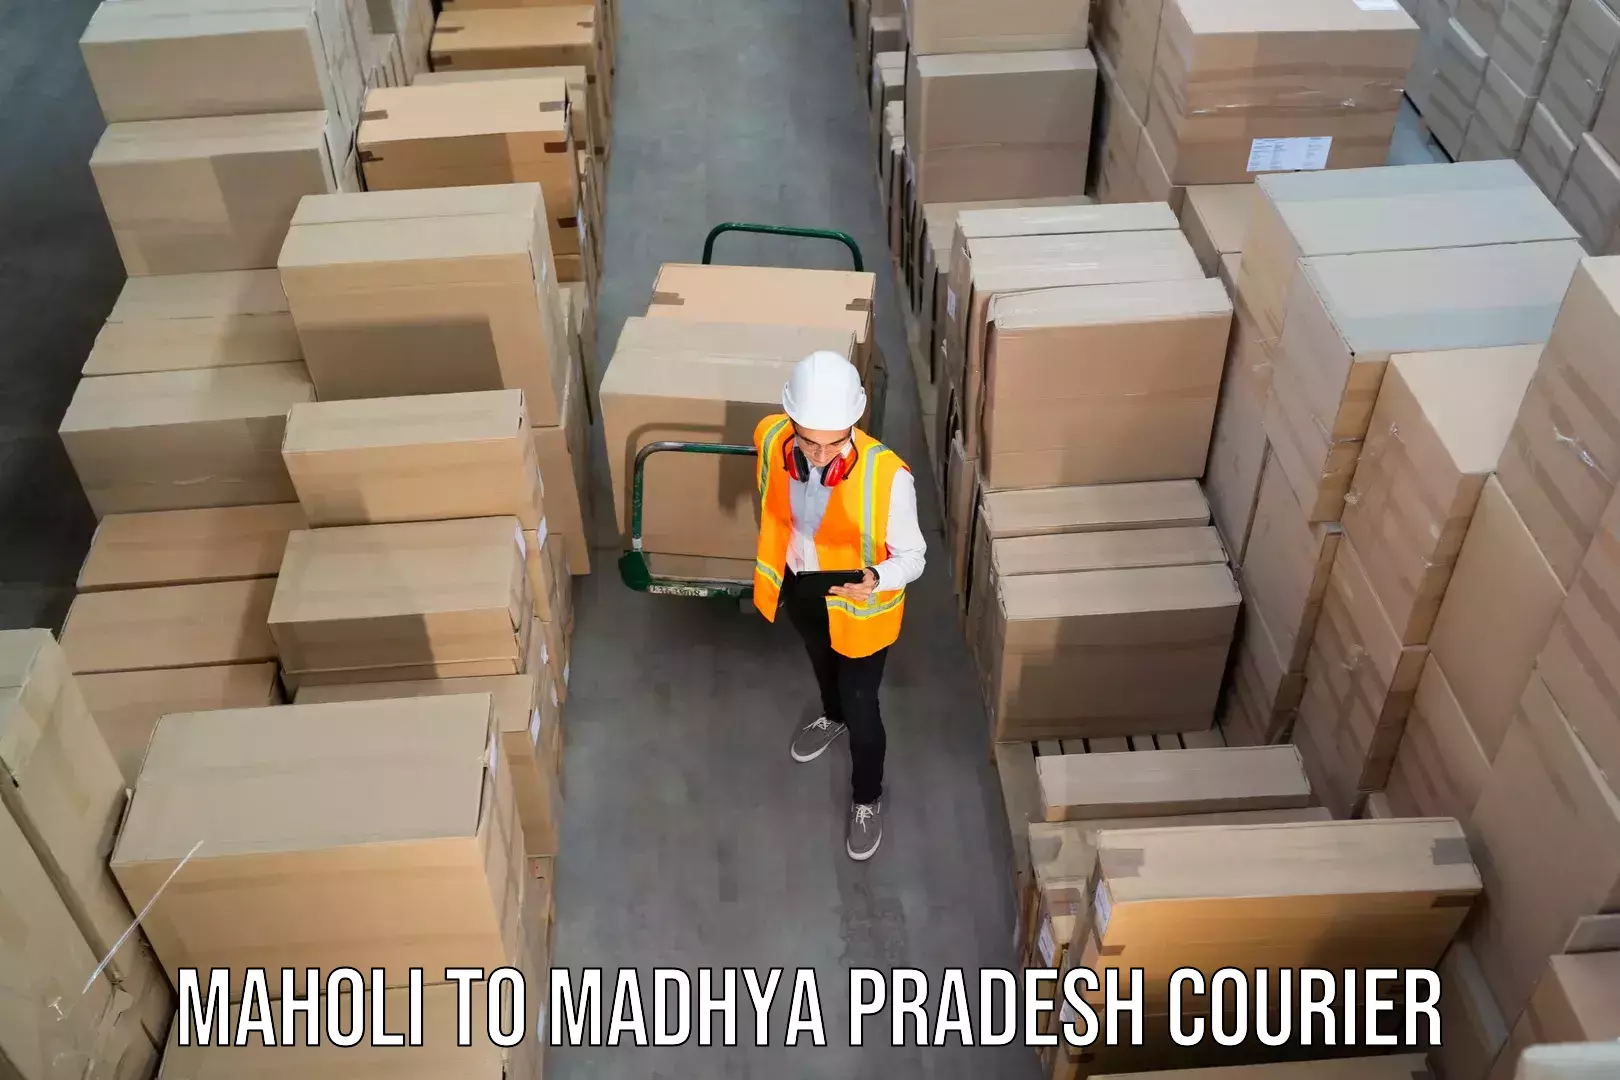 Multi-national courier services Maholi to Dindori